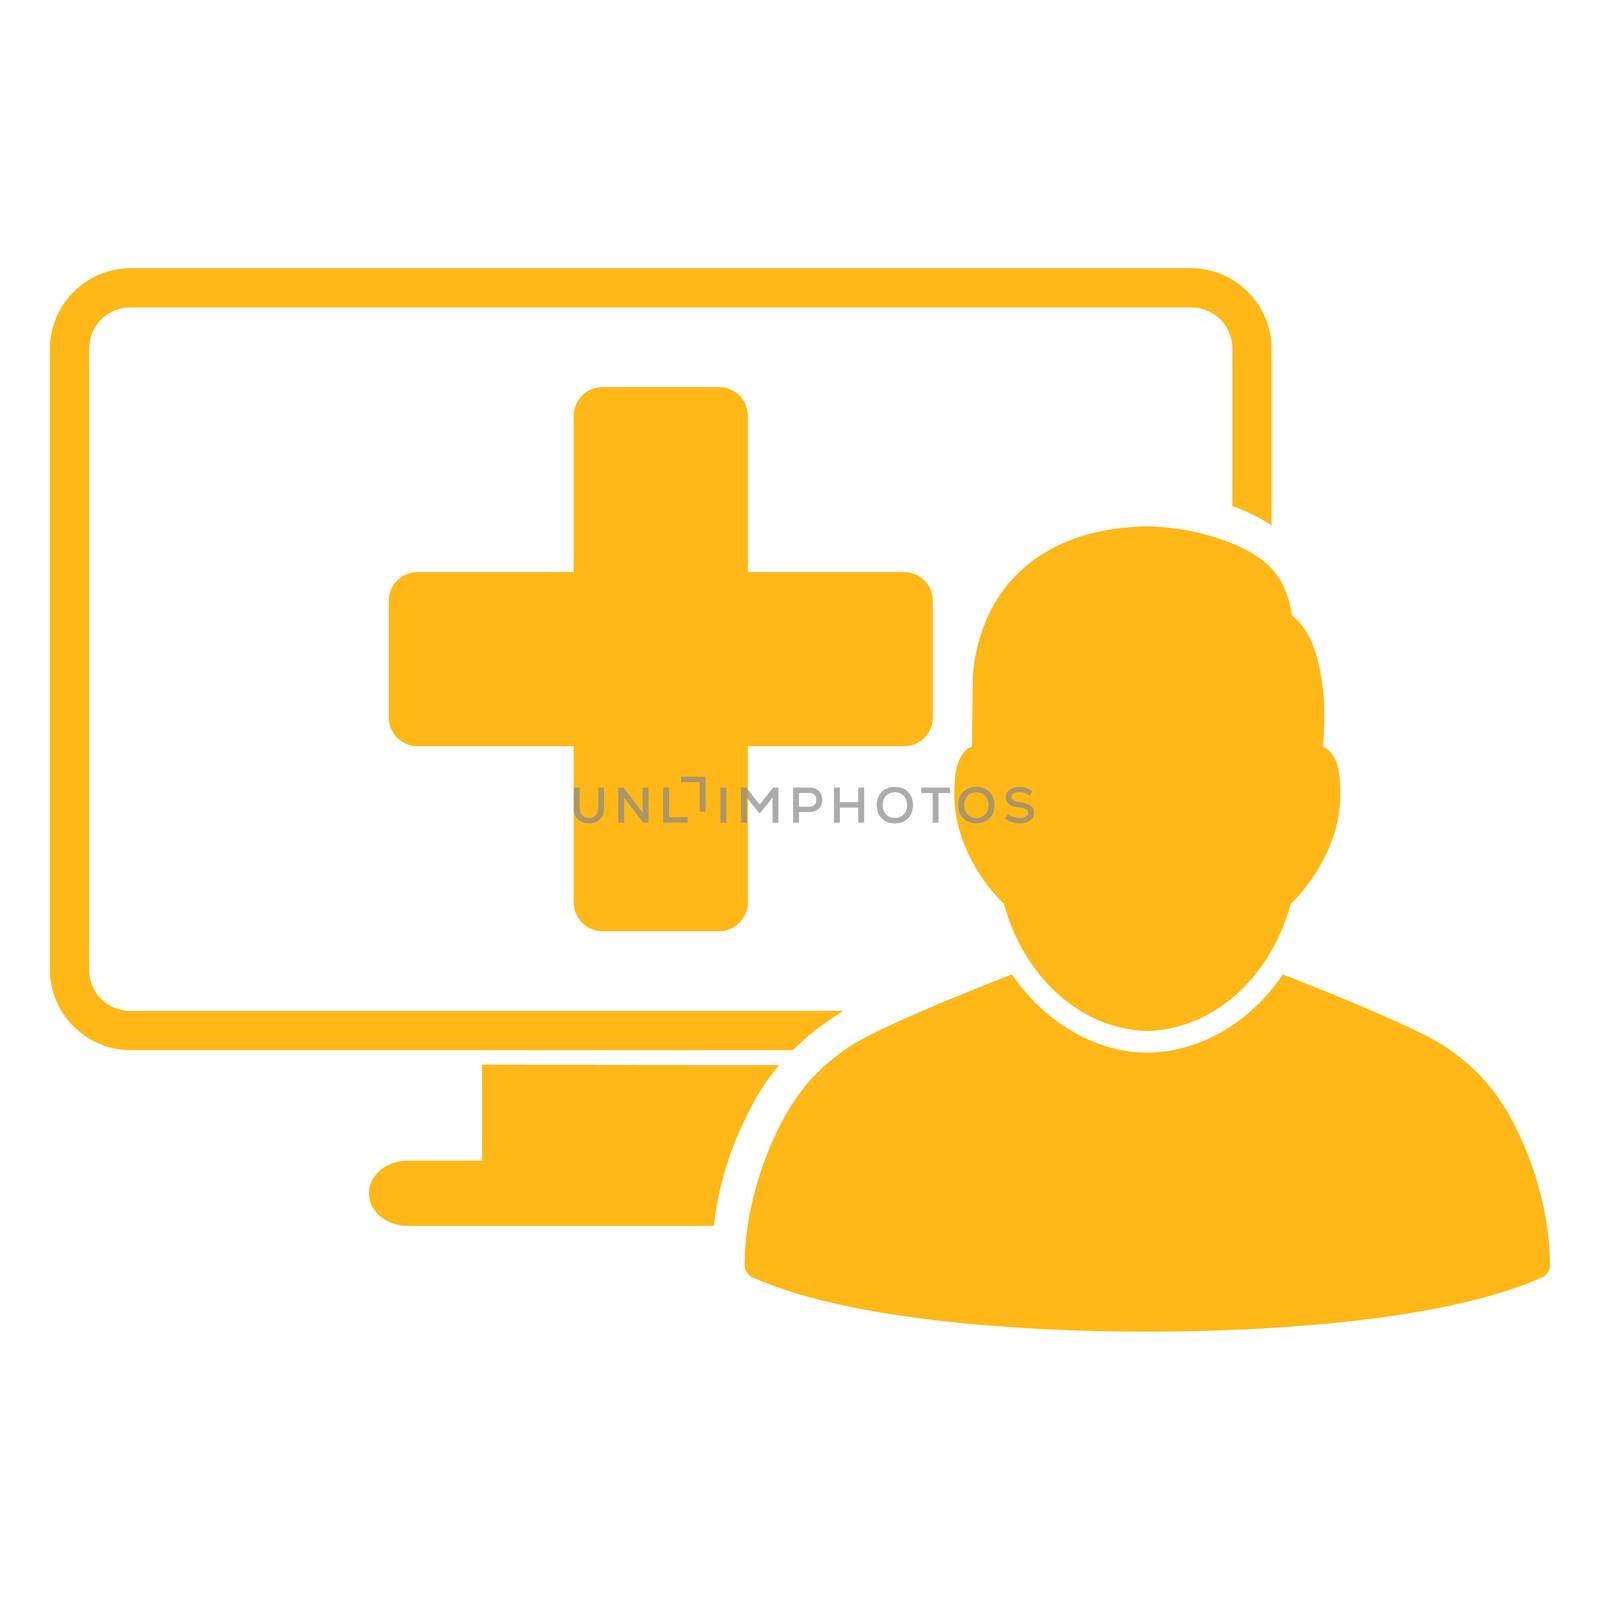 Online Medicine raster icon. Style is flat symbol, yellow color, rounded angles, white background.